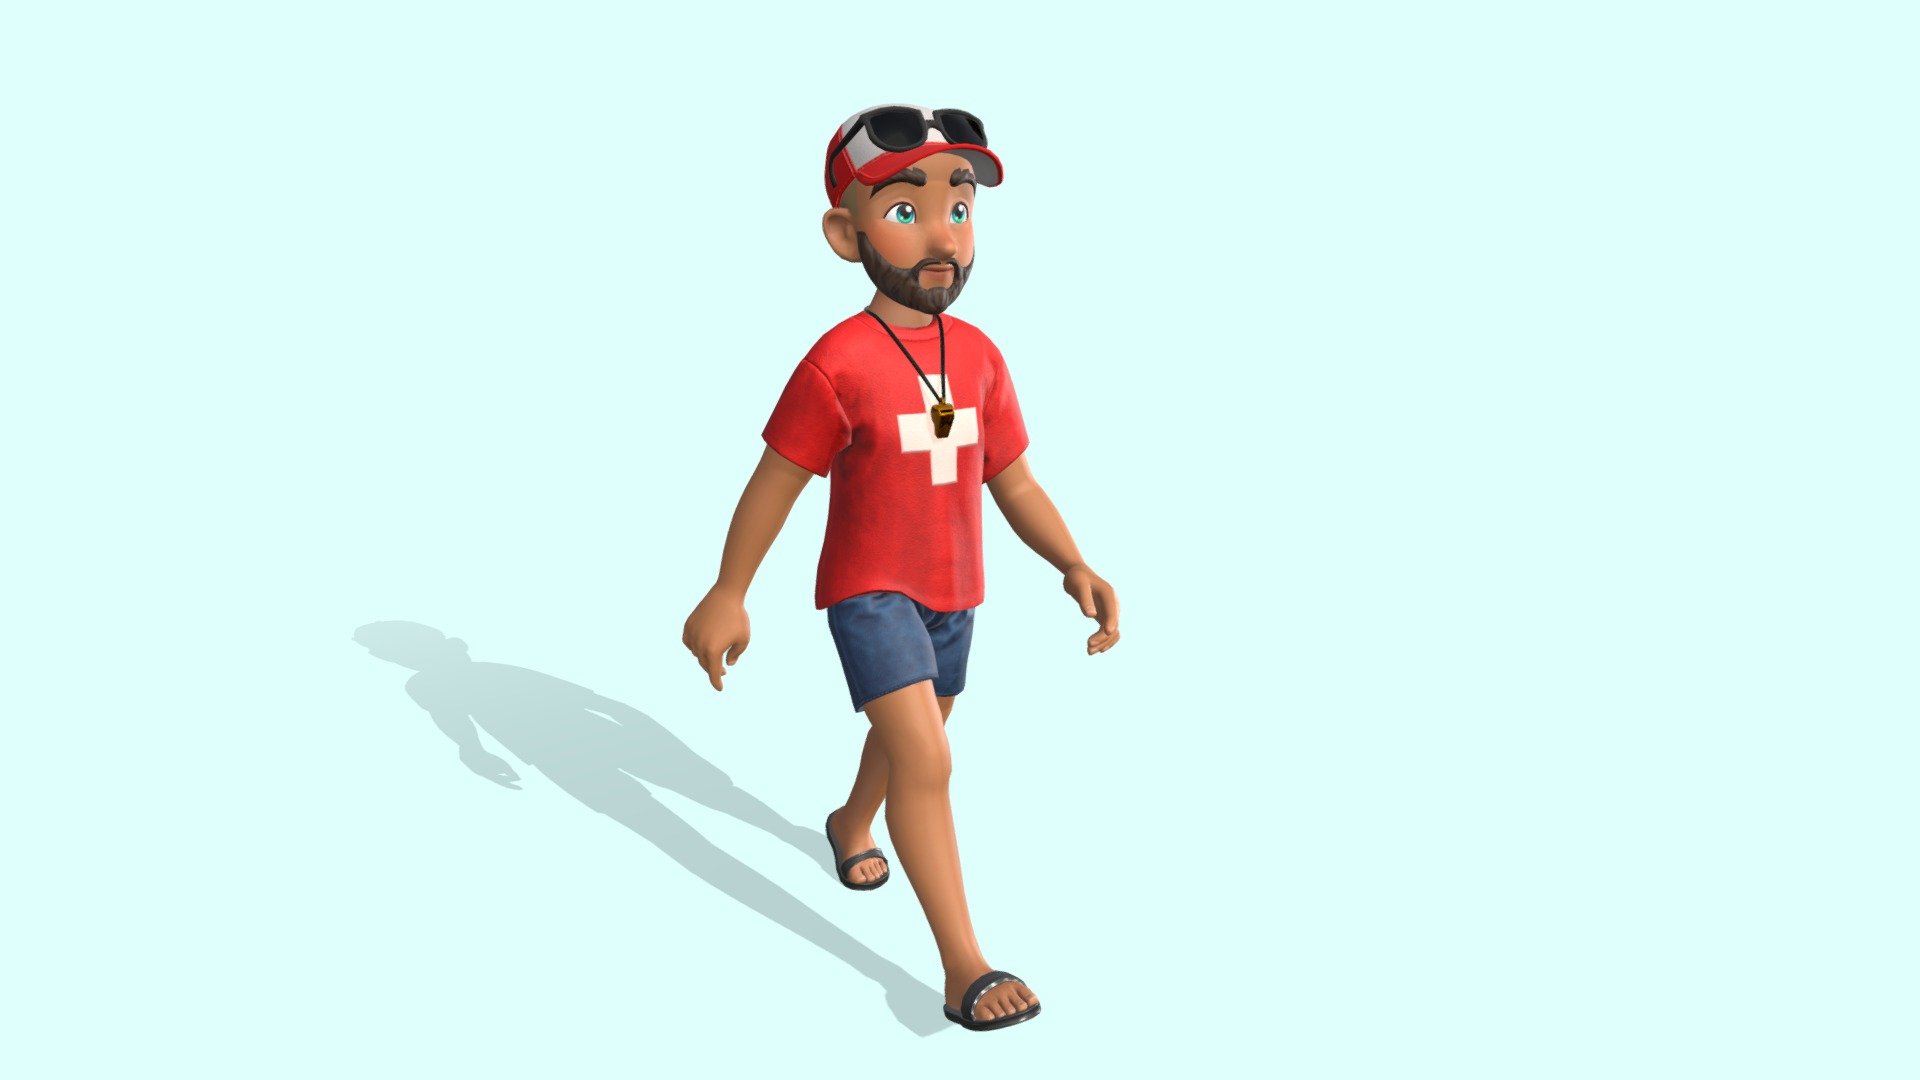 Lifeguard Character from the KEKOS Tropical Beach package.

Ready to import in your preferred videogame engine or 3D software.

FORMAT:

FBX

POLYGON COUNT:

~20k Triangles

TEXTURES:

PBR Textures: Diffuse + Normal map + Metallic (R) / Smoothness (A) / Ambient Oclussion (G)

Size: 2048x2048 for most of the assets. A few 4096x4096 for detailed parts.

PNG format

RIG:




Full human rig.

27 blendshapes for face expresions.

ANIMATIONS:




Idle

Walk

Run

Jump

Floating

Sit
 - KEKOS Tropical Beach - Lifeguard - Buy Royalty Free 3D model by Mameshiba Games (@MameshibaGames) 3d model